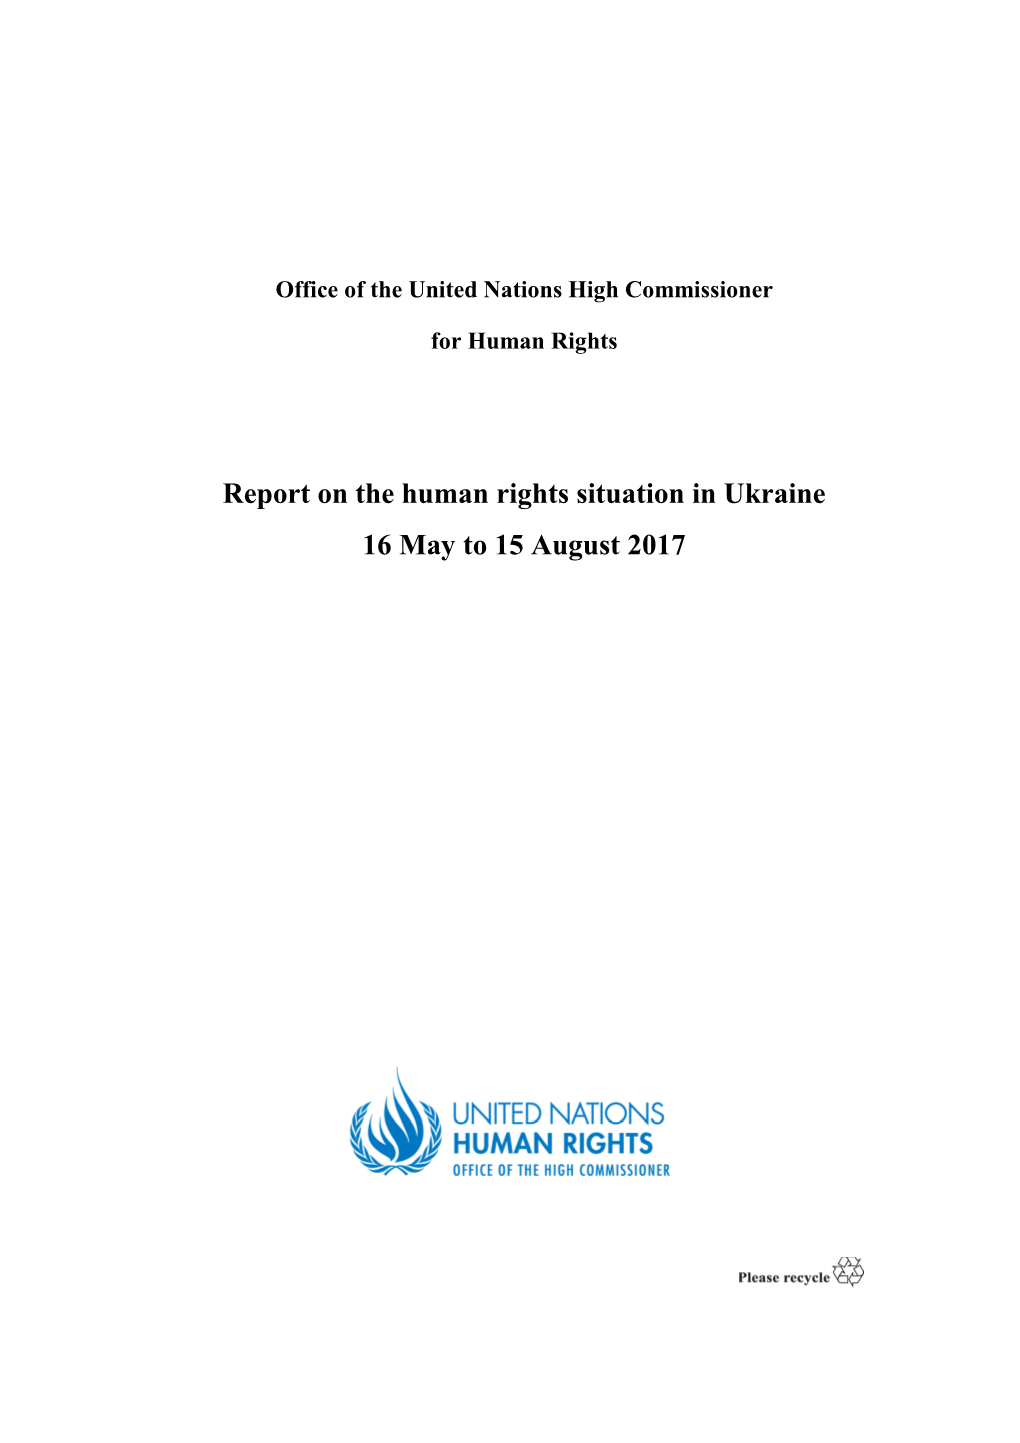 Report on the Human Rights Situation in Ukraine 16 May to 15 August 2017